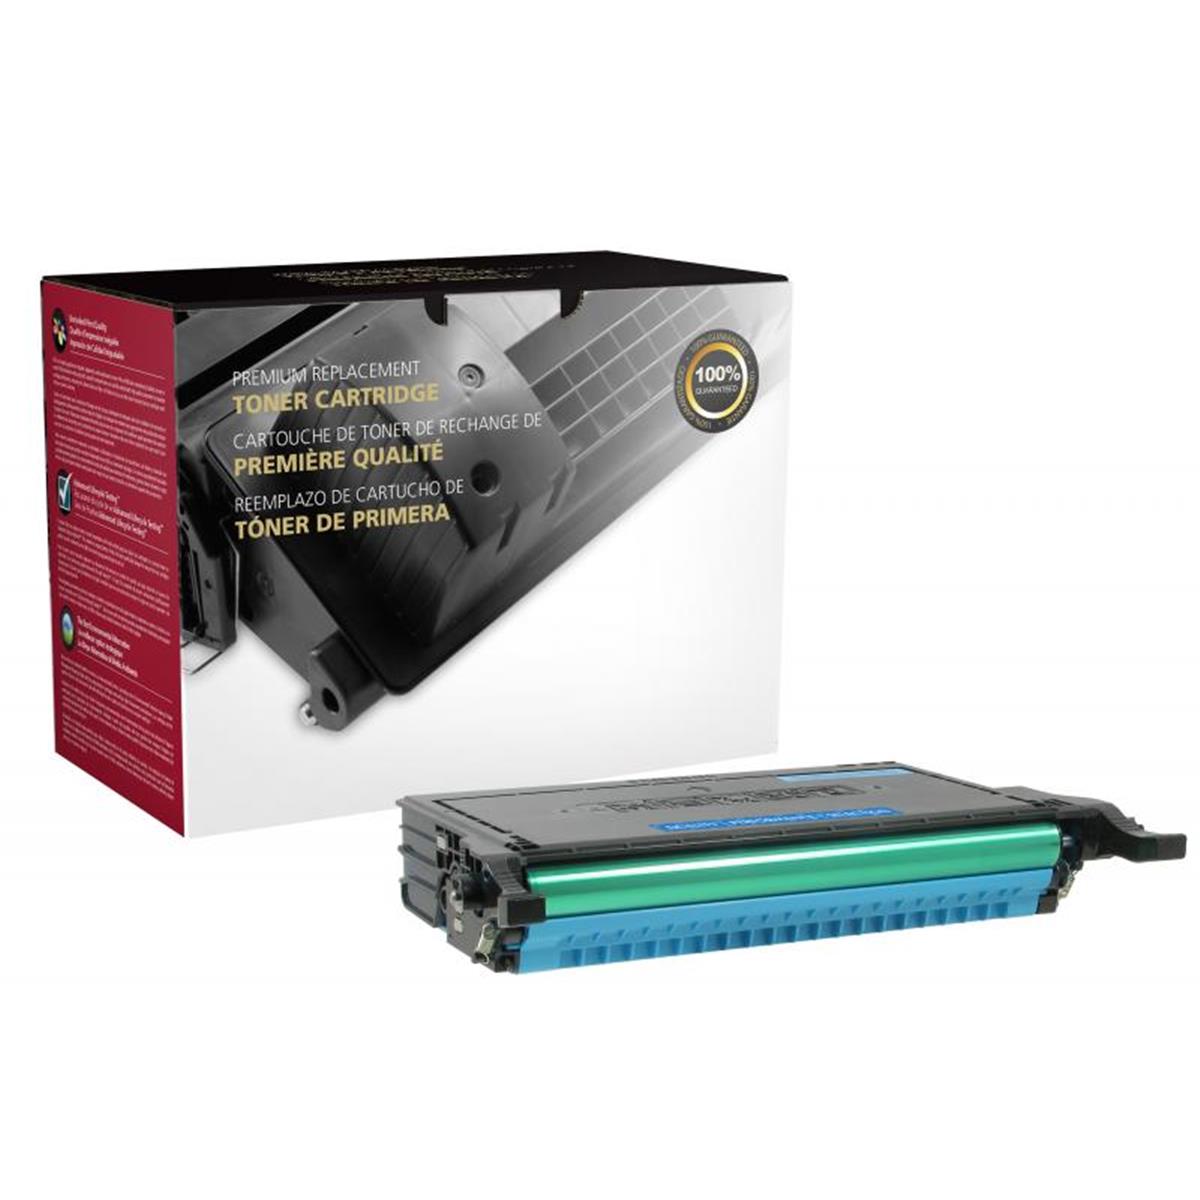 Picture of Dell 200534P High Yield Cyan Toner Cartridge for Dell 2145